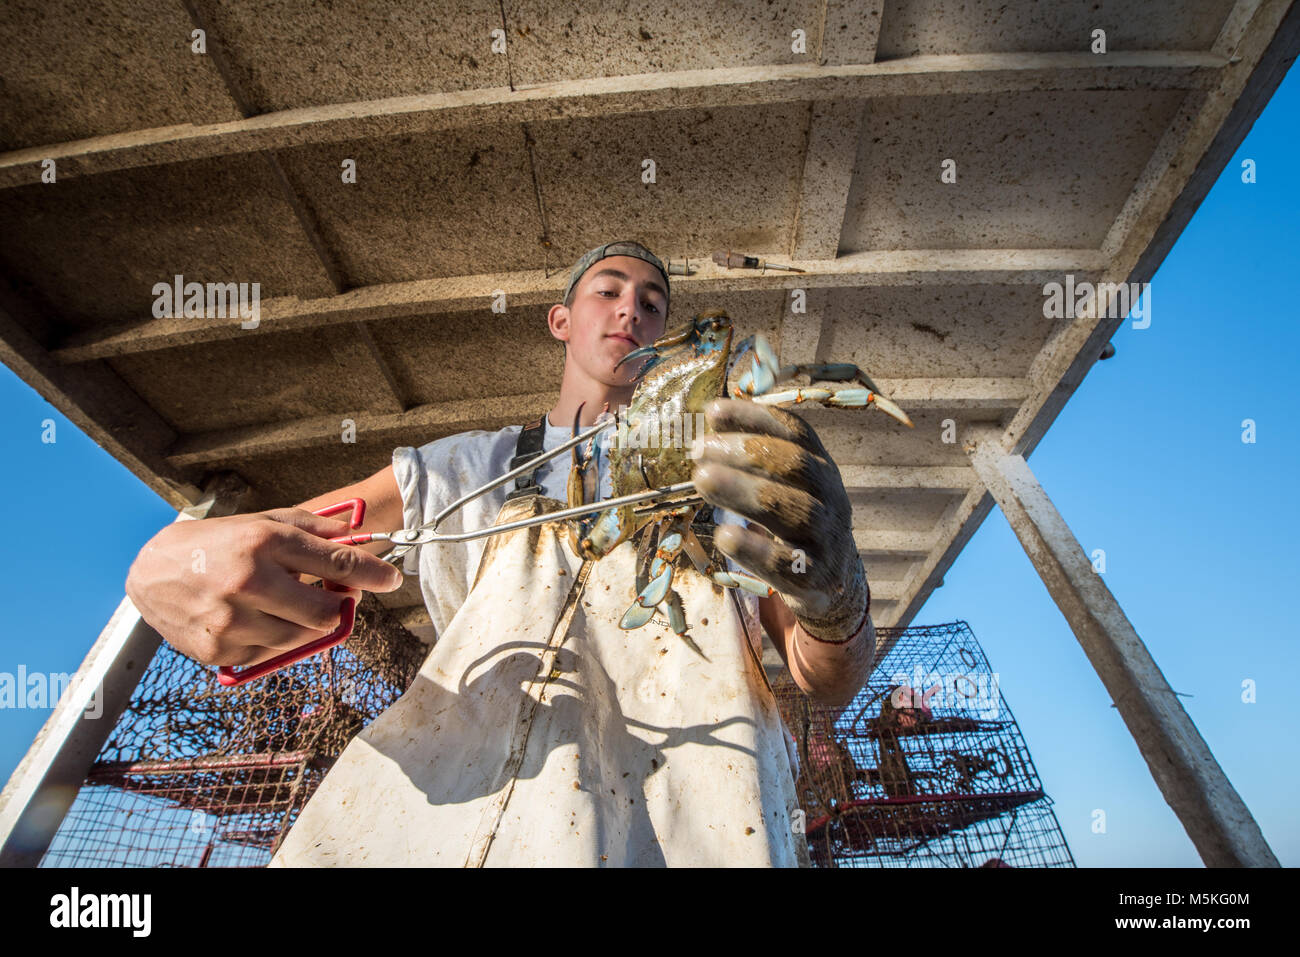 Low angle view of young waterman using tongs to handle Chesapeake blue crab, Dundalk, Maryland. Stock Photo